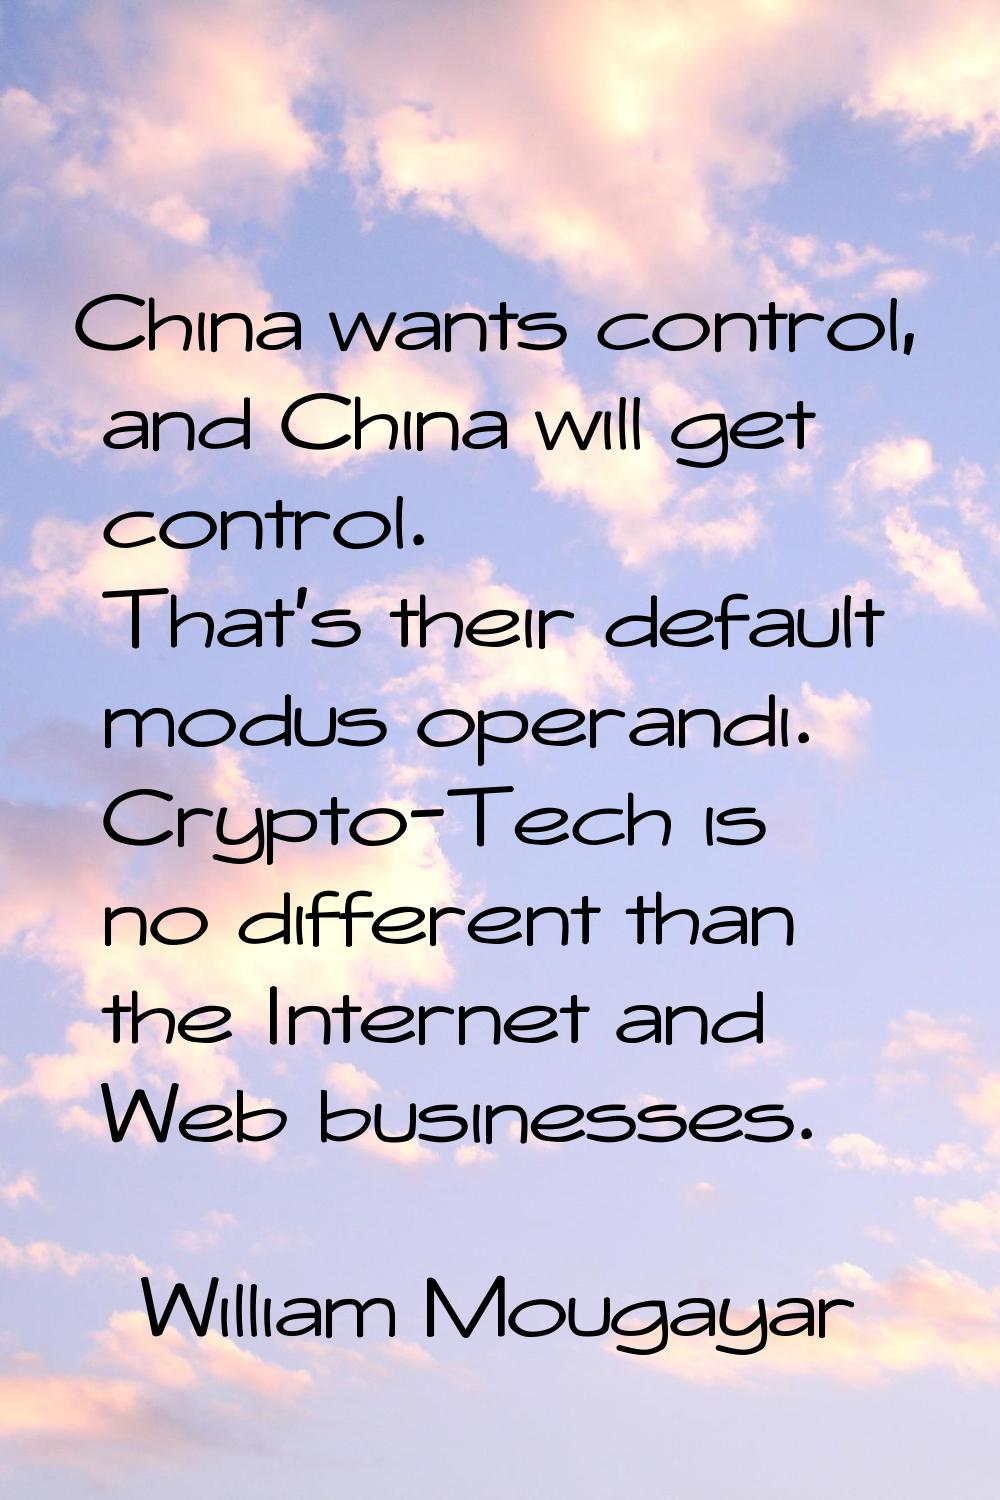 China wants control, and China will get control. That's their default modus operandi. Crypto-Tech i